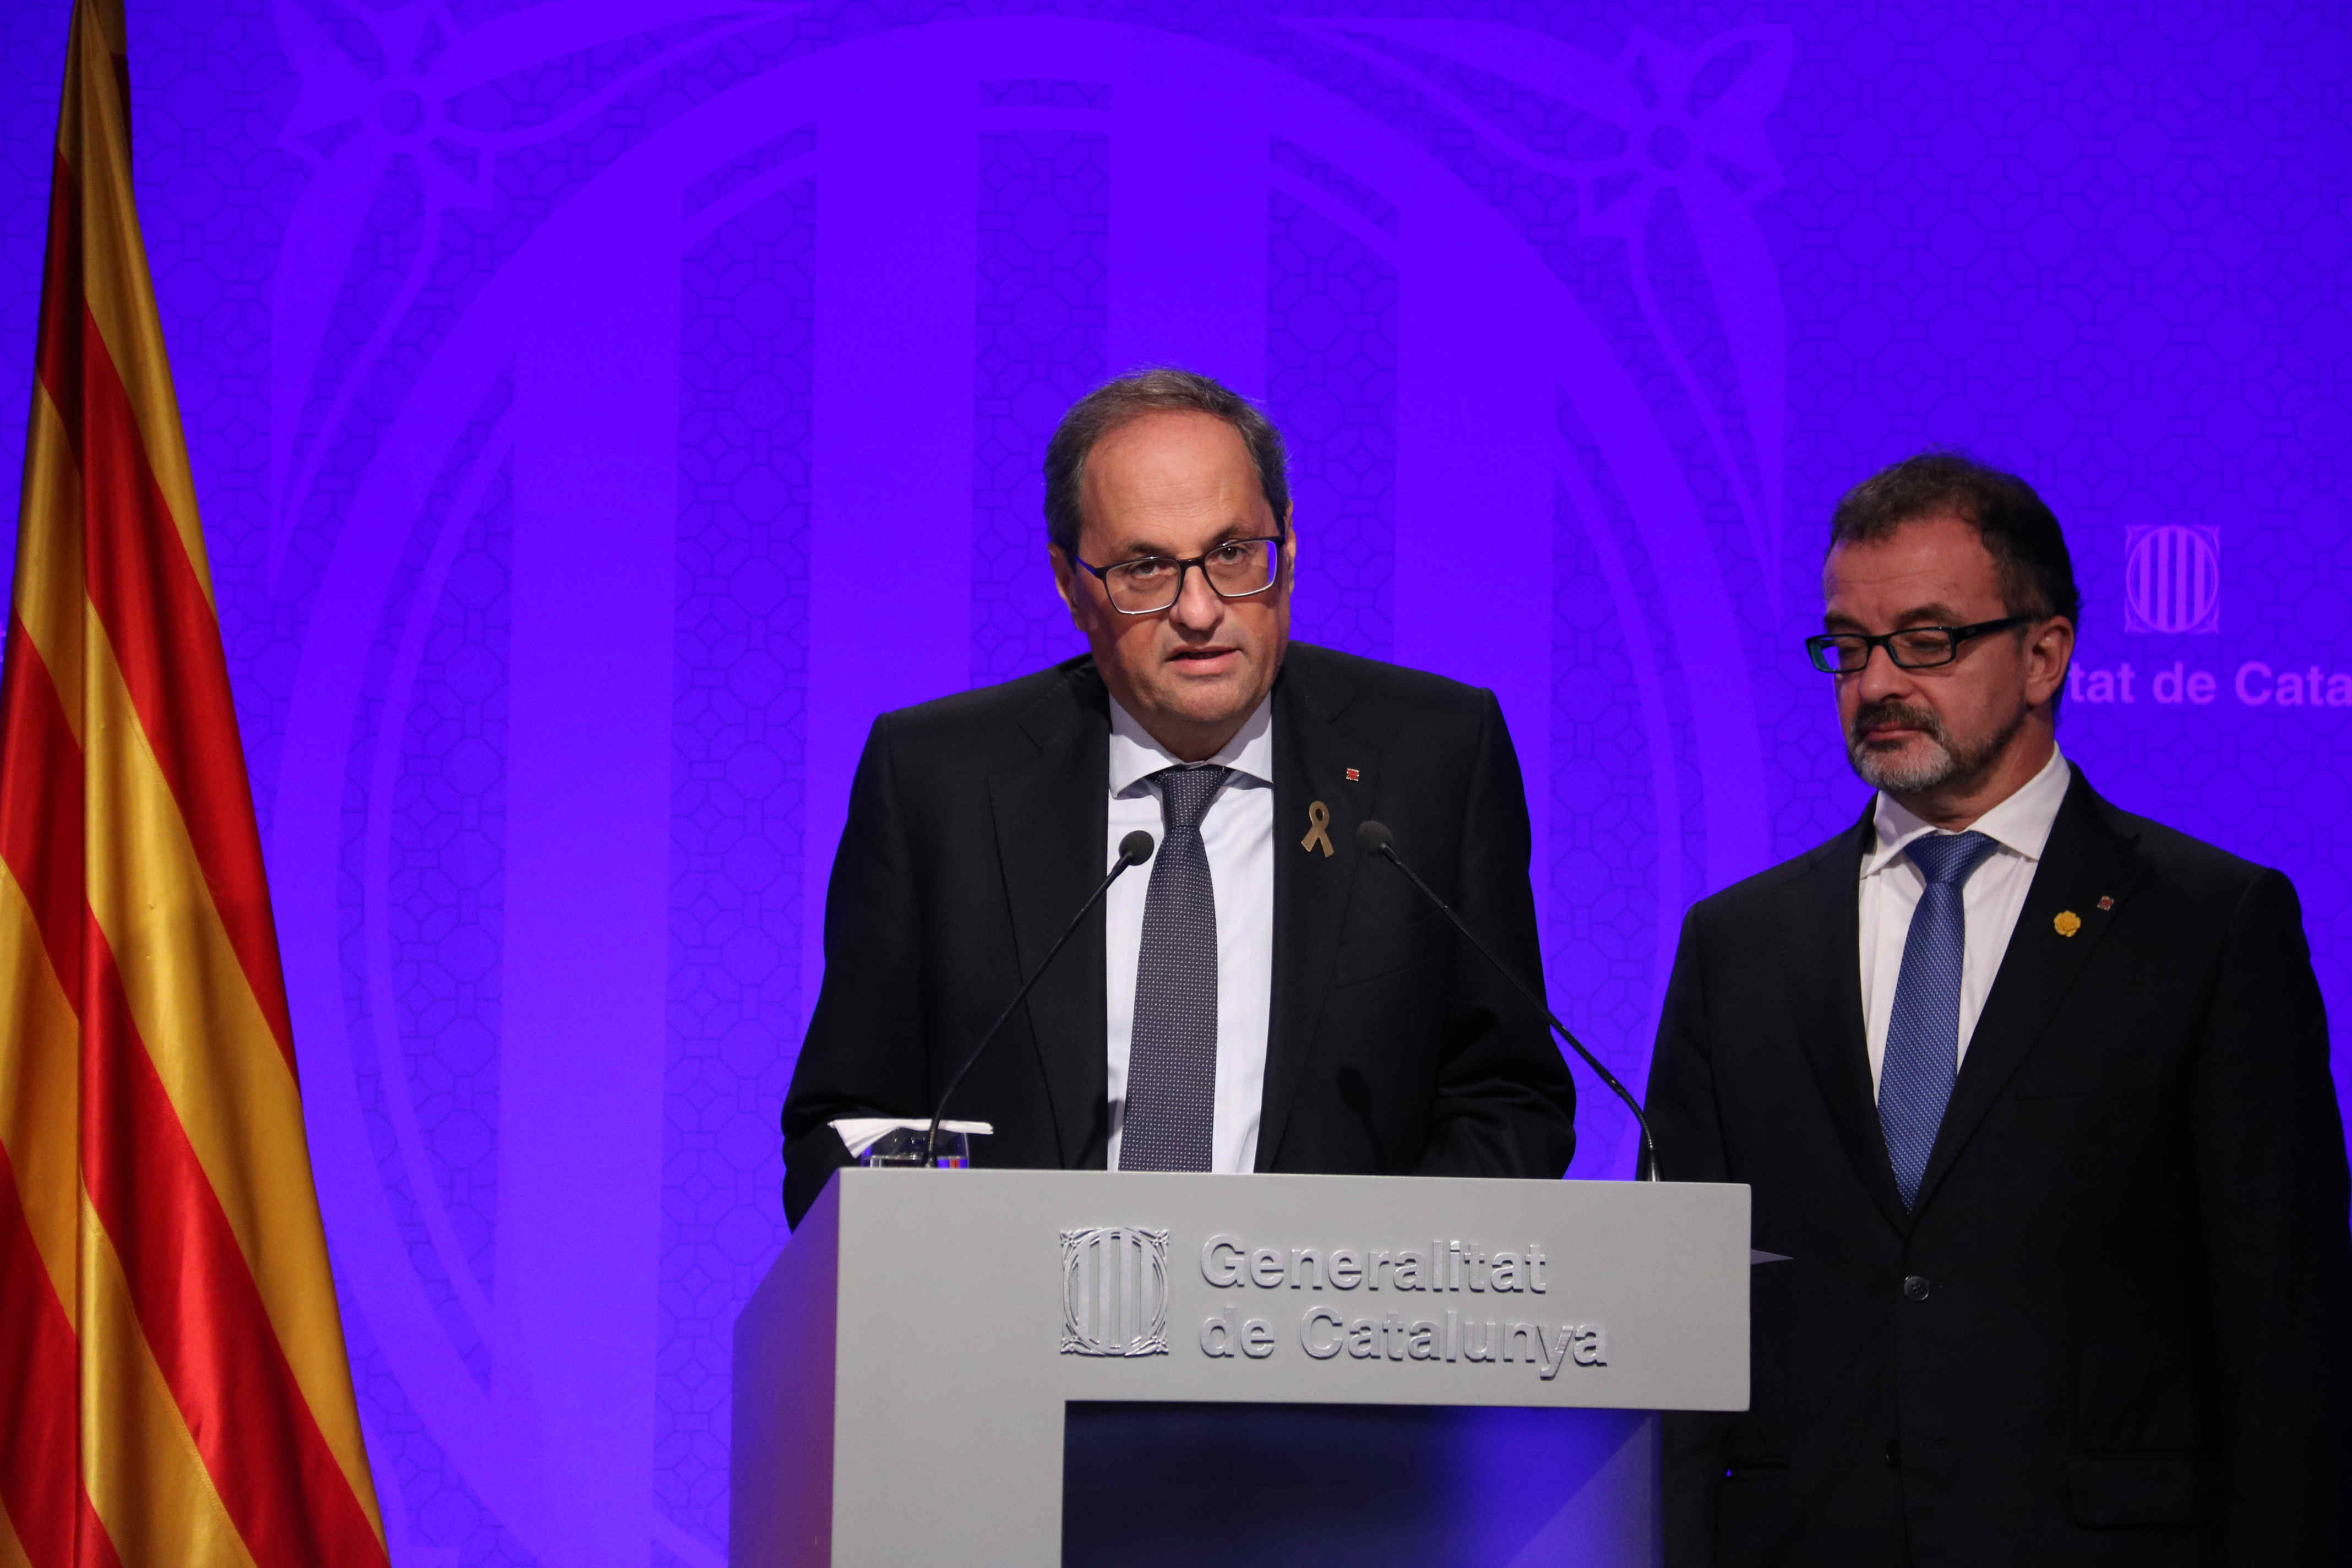 Catalan president Quim Torra (center) and foreign minister Alfred Bosch (by Alan Ruiz Terol)